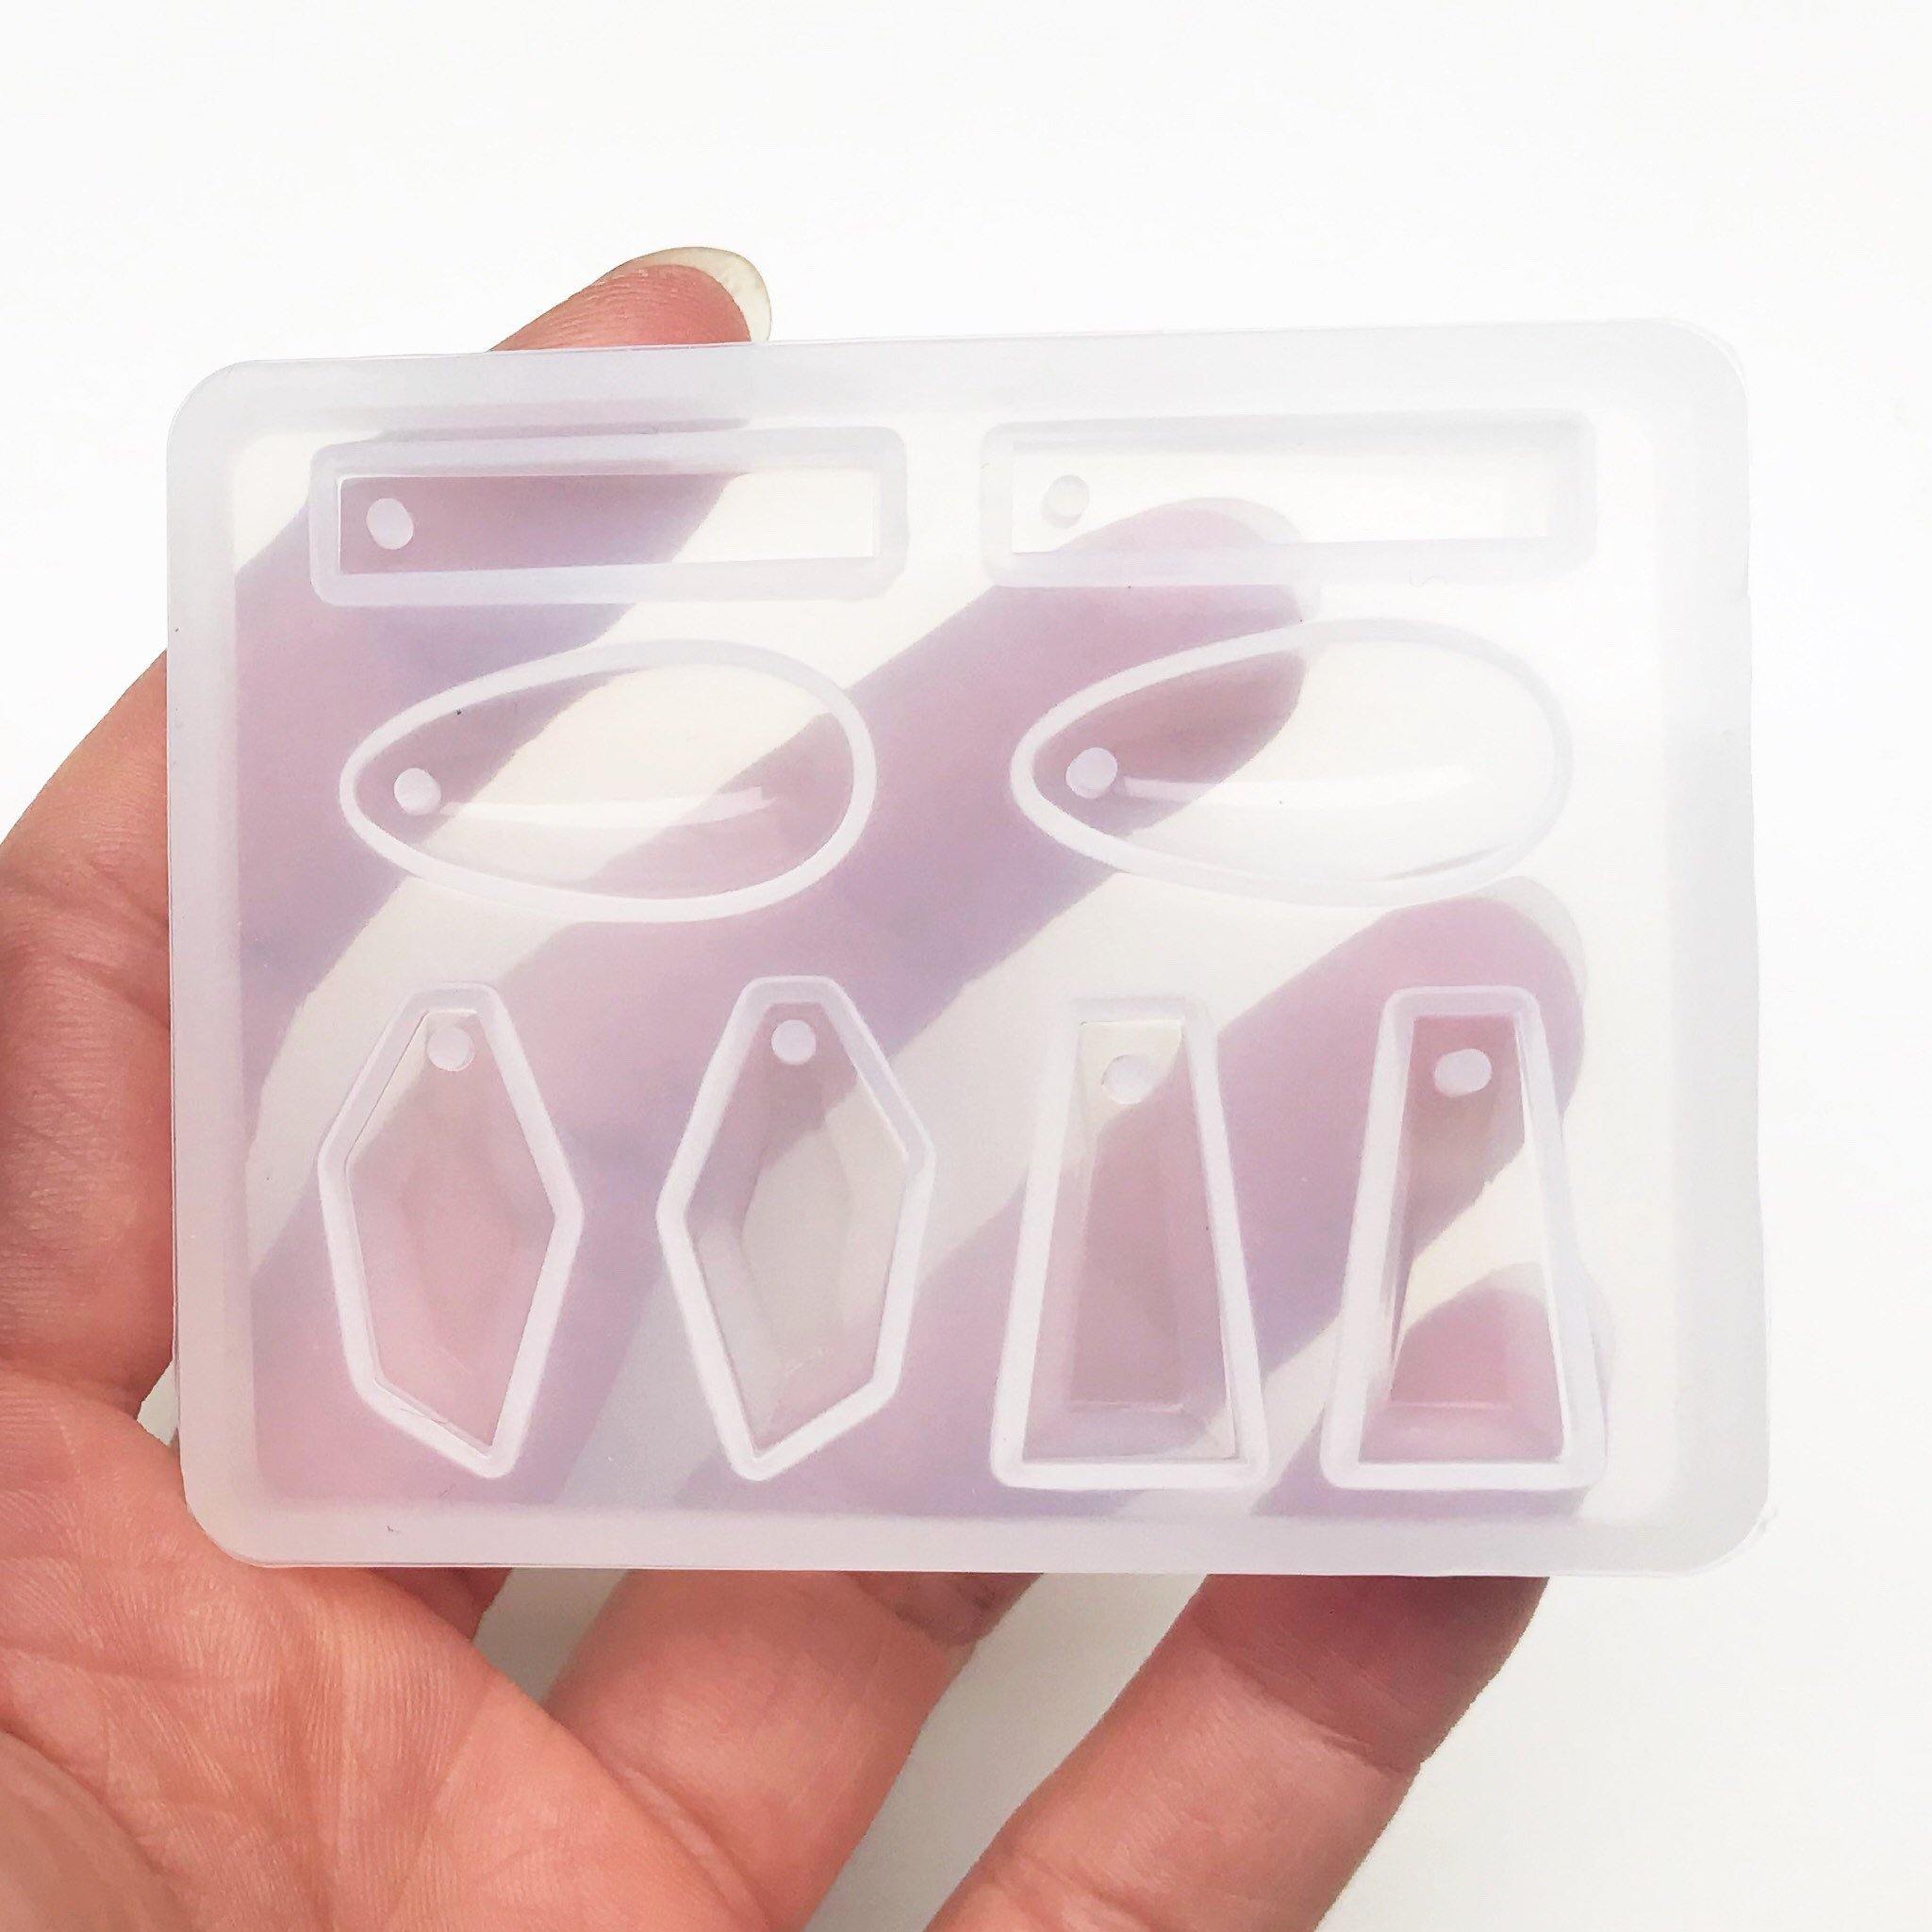 Small earring silicone mould - Poethan